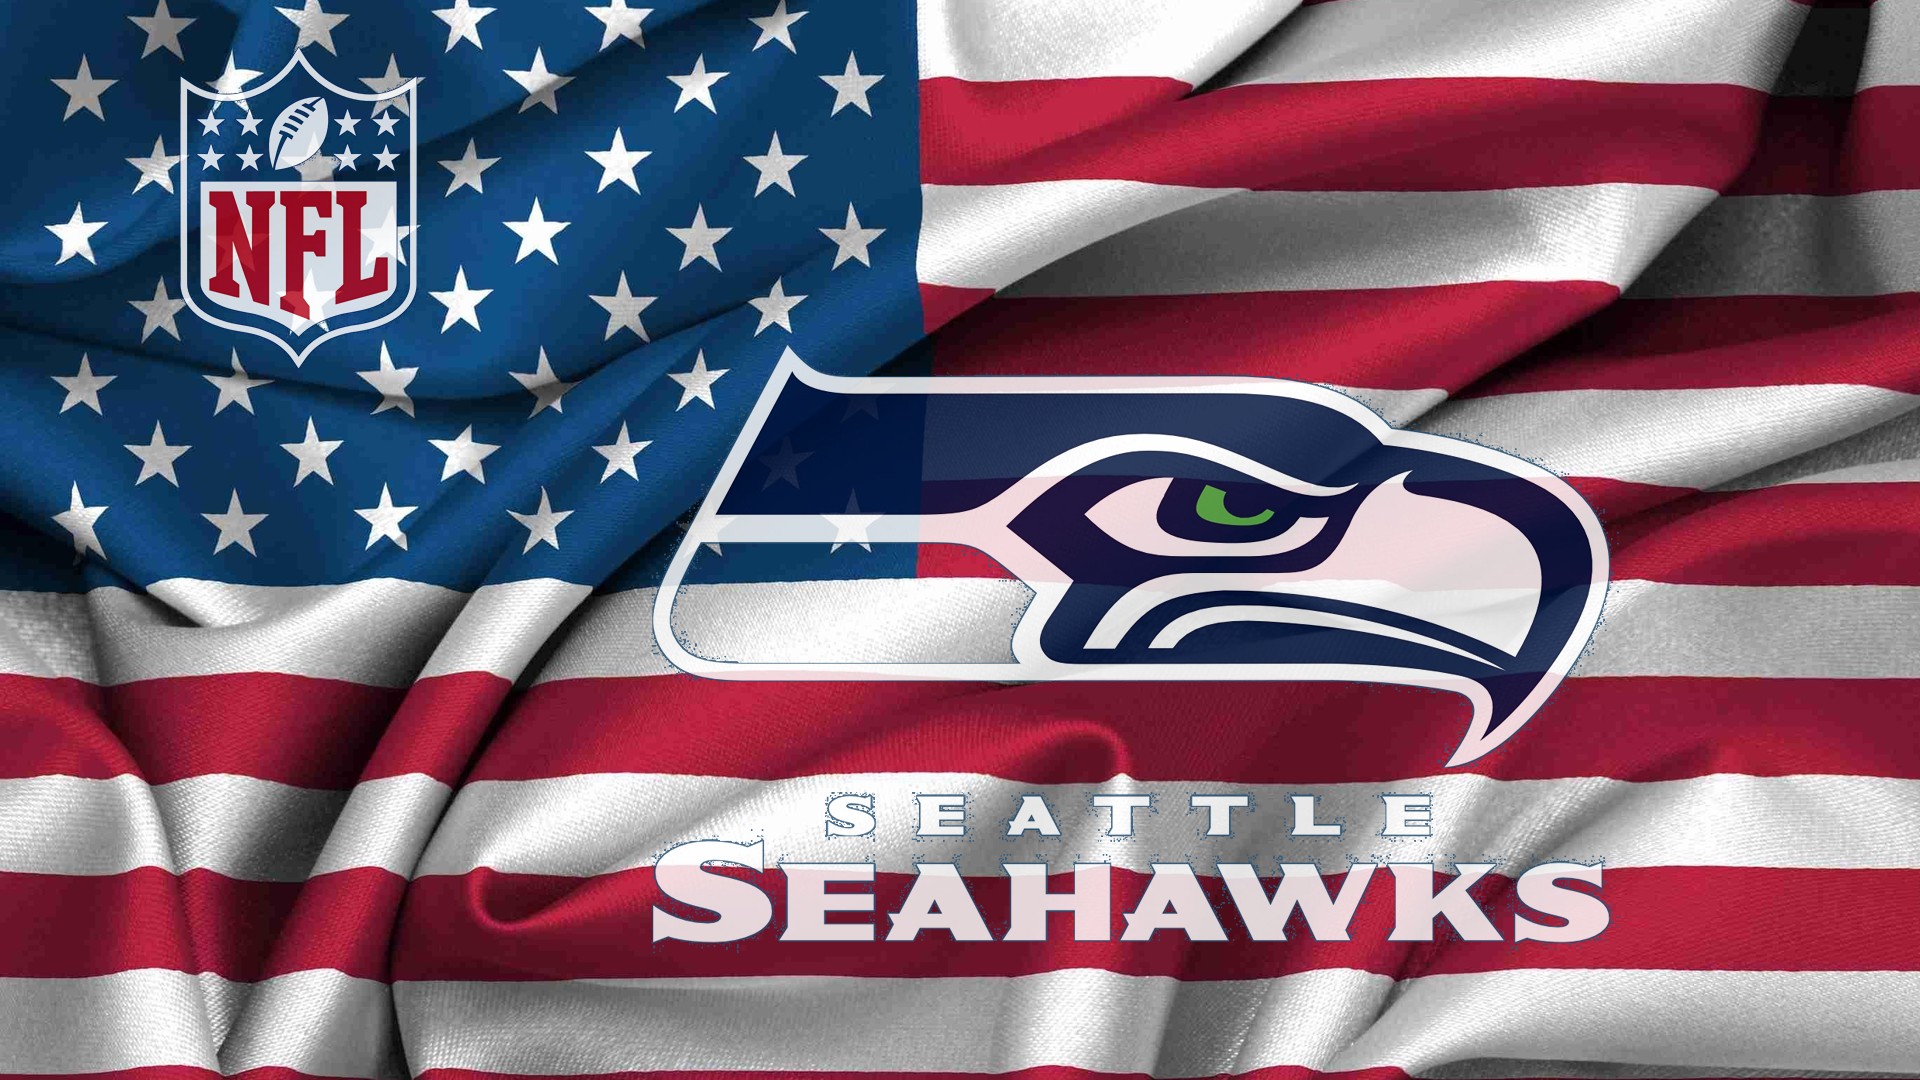 Seattle Seahawks Nfl 1920x1080 Hd Images